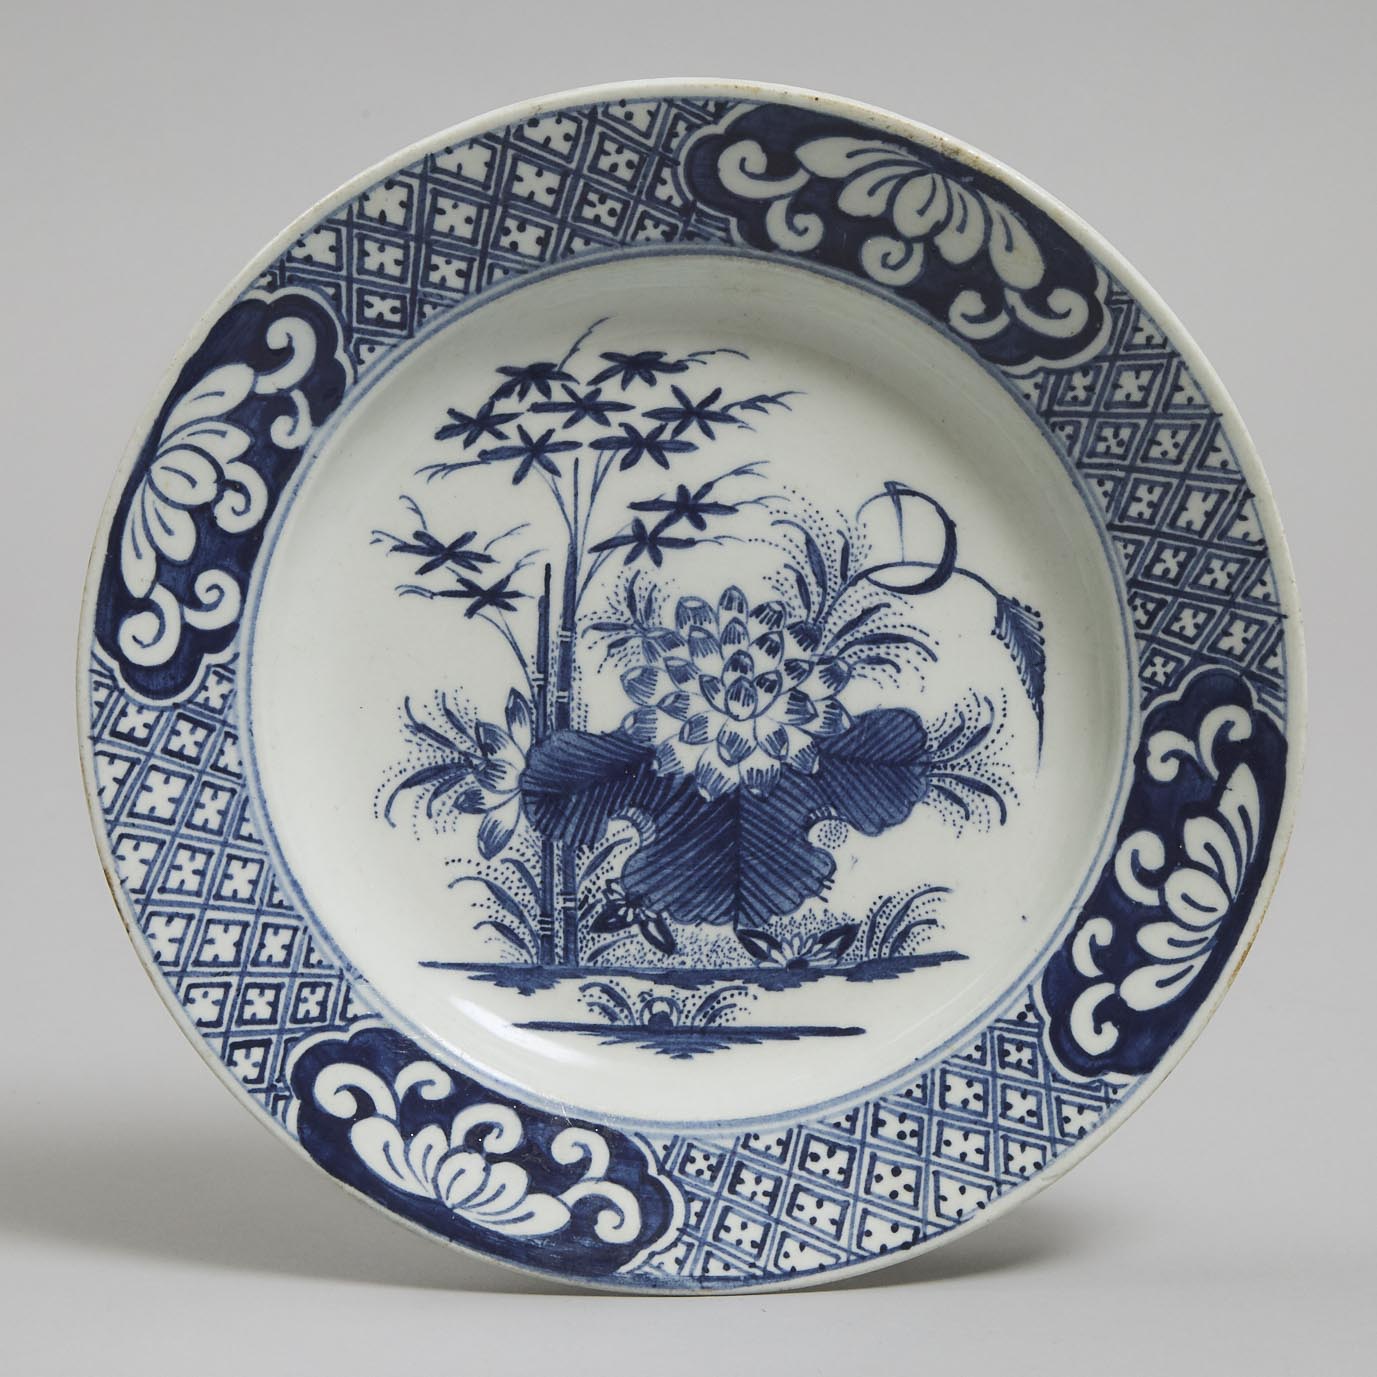 Bow Blue Painted Plate, c.1760-65